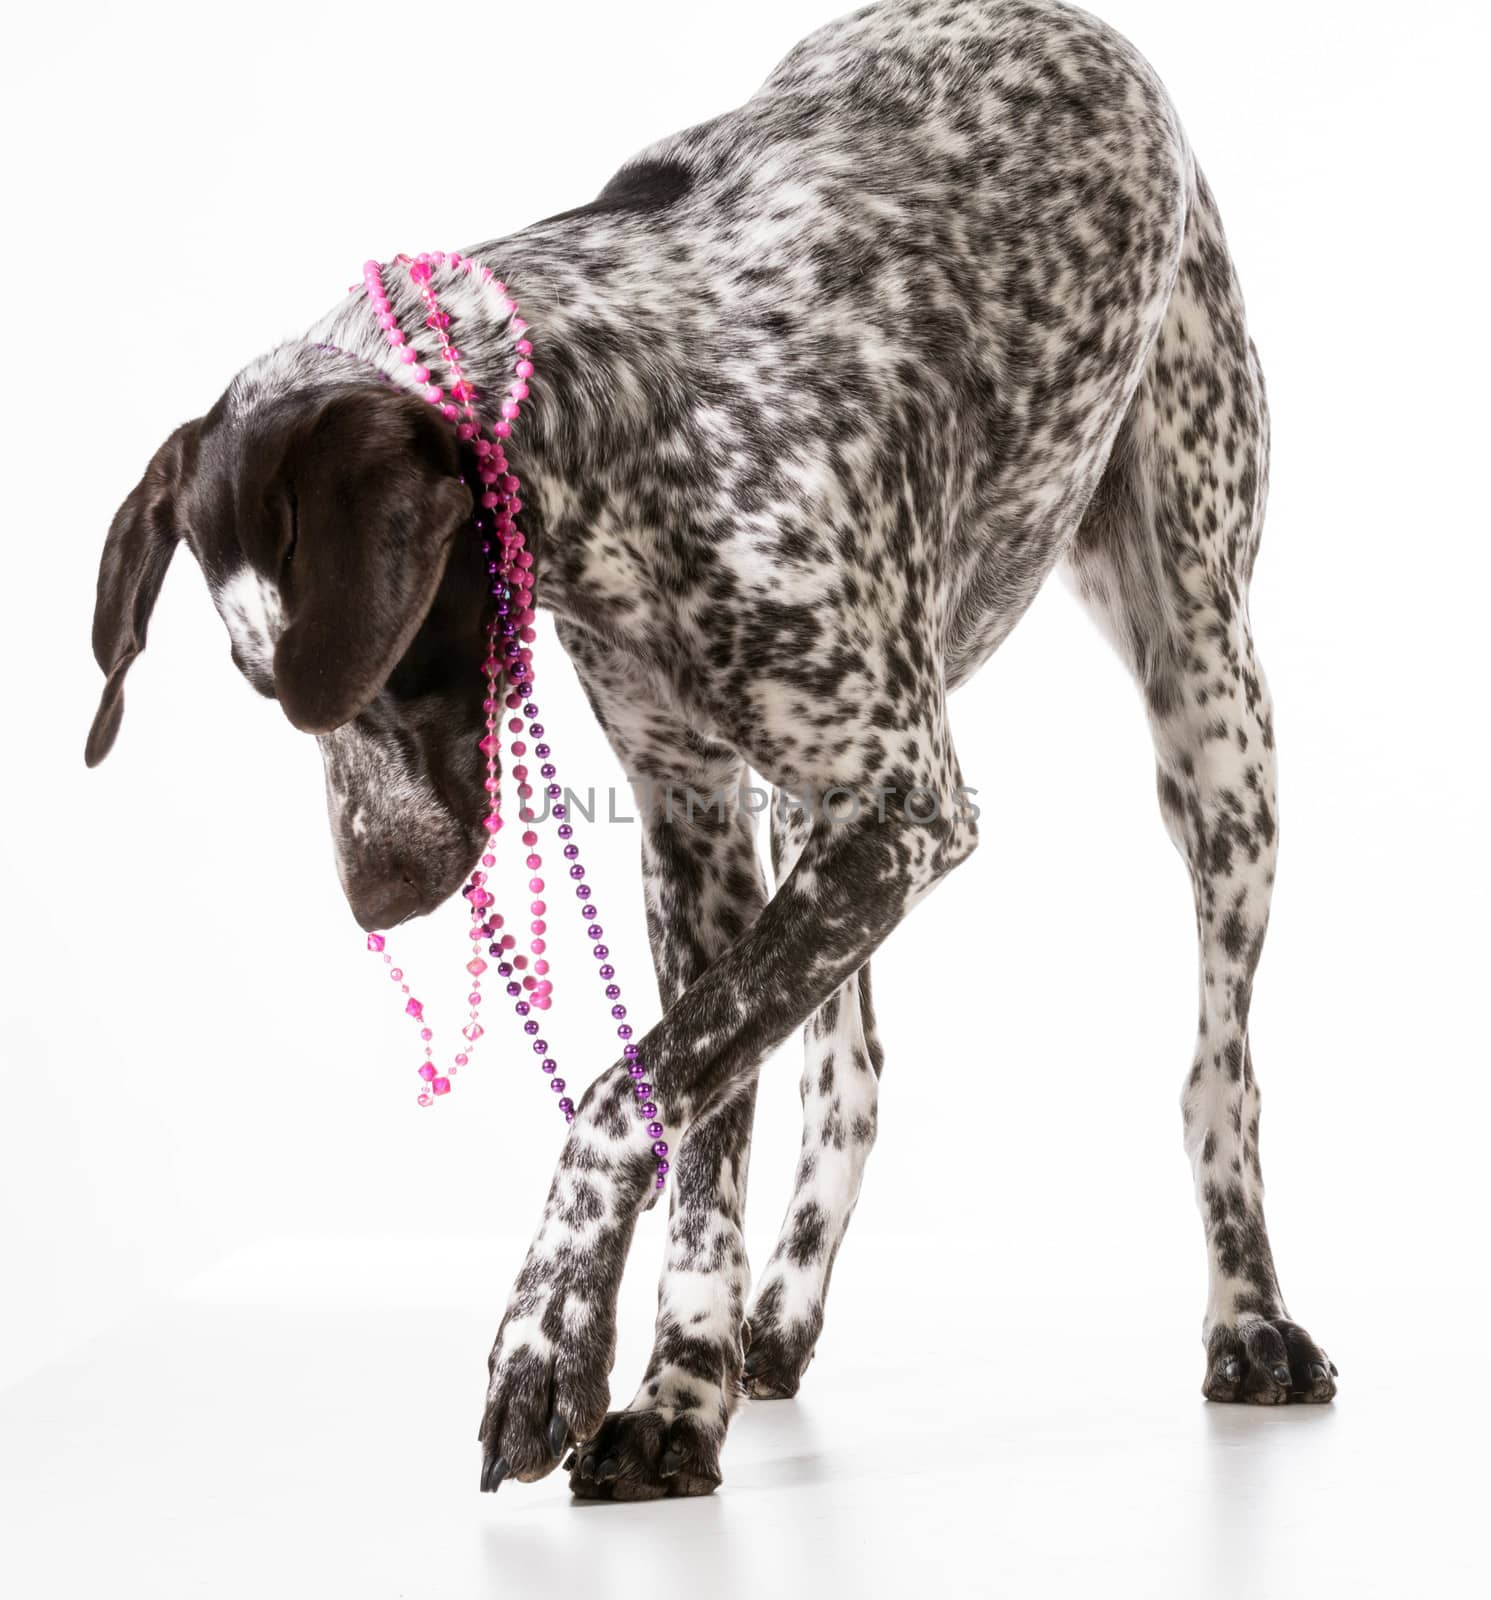 bad dog - naughty german shorthaired pointer tugging on beads isolated on white background